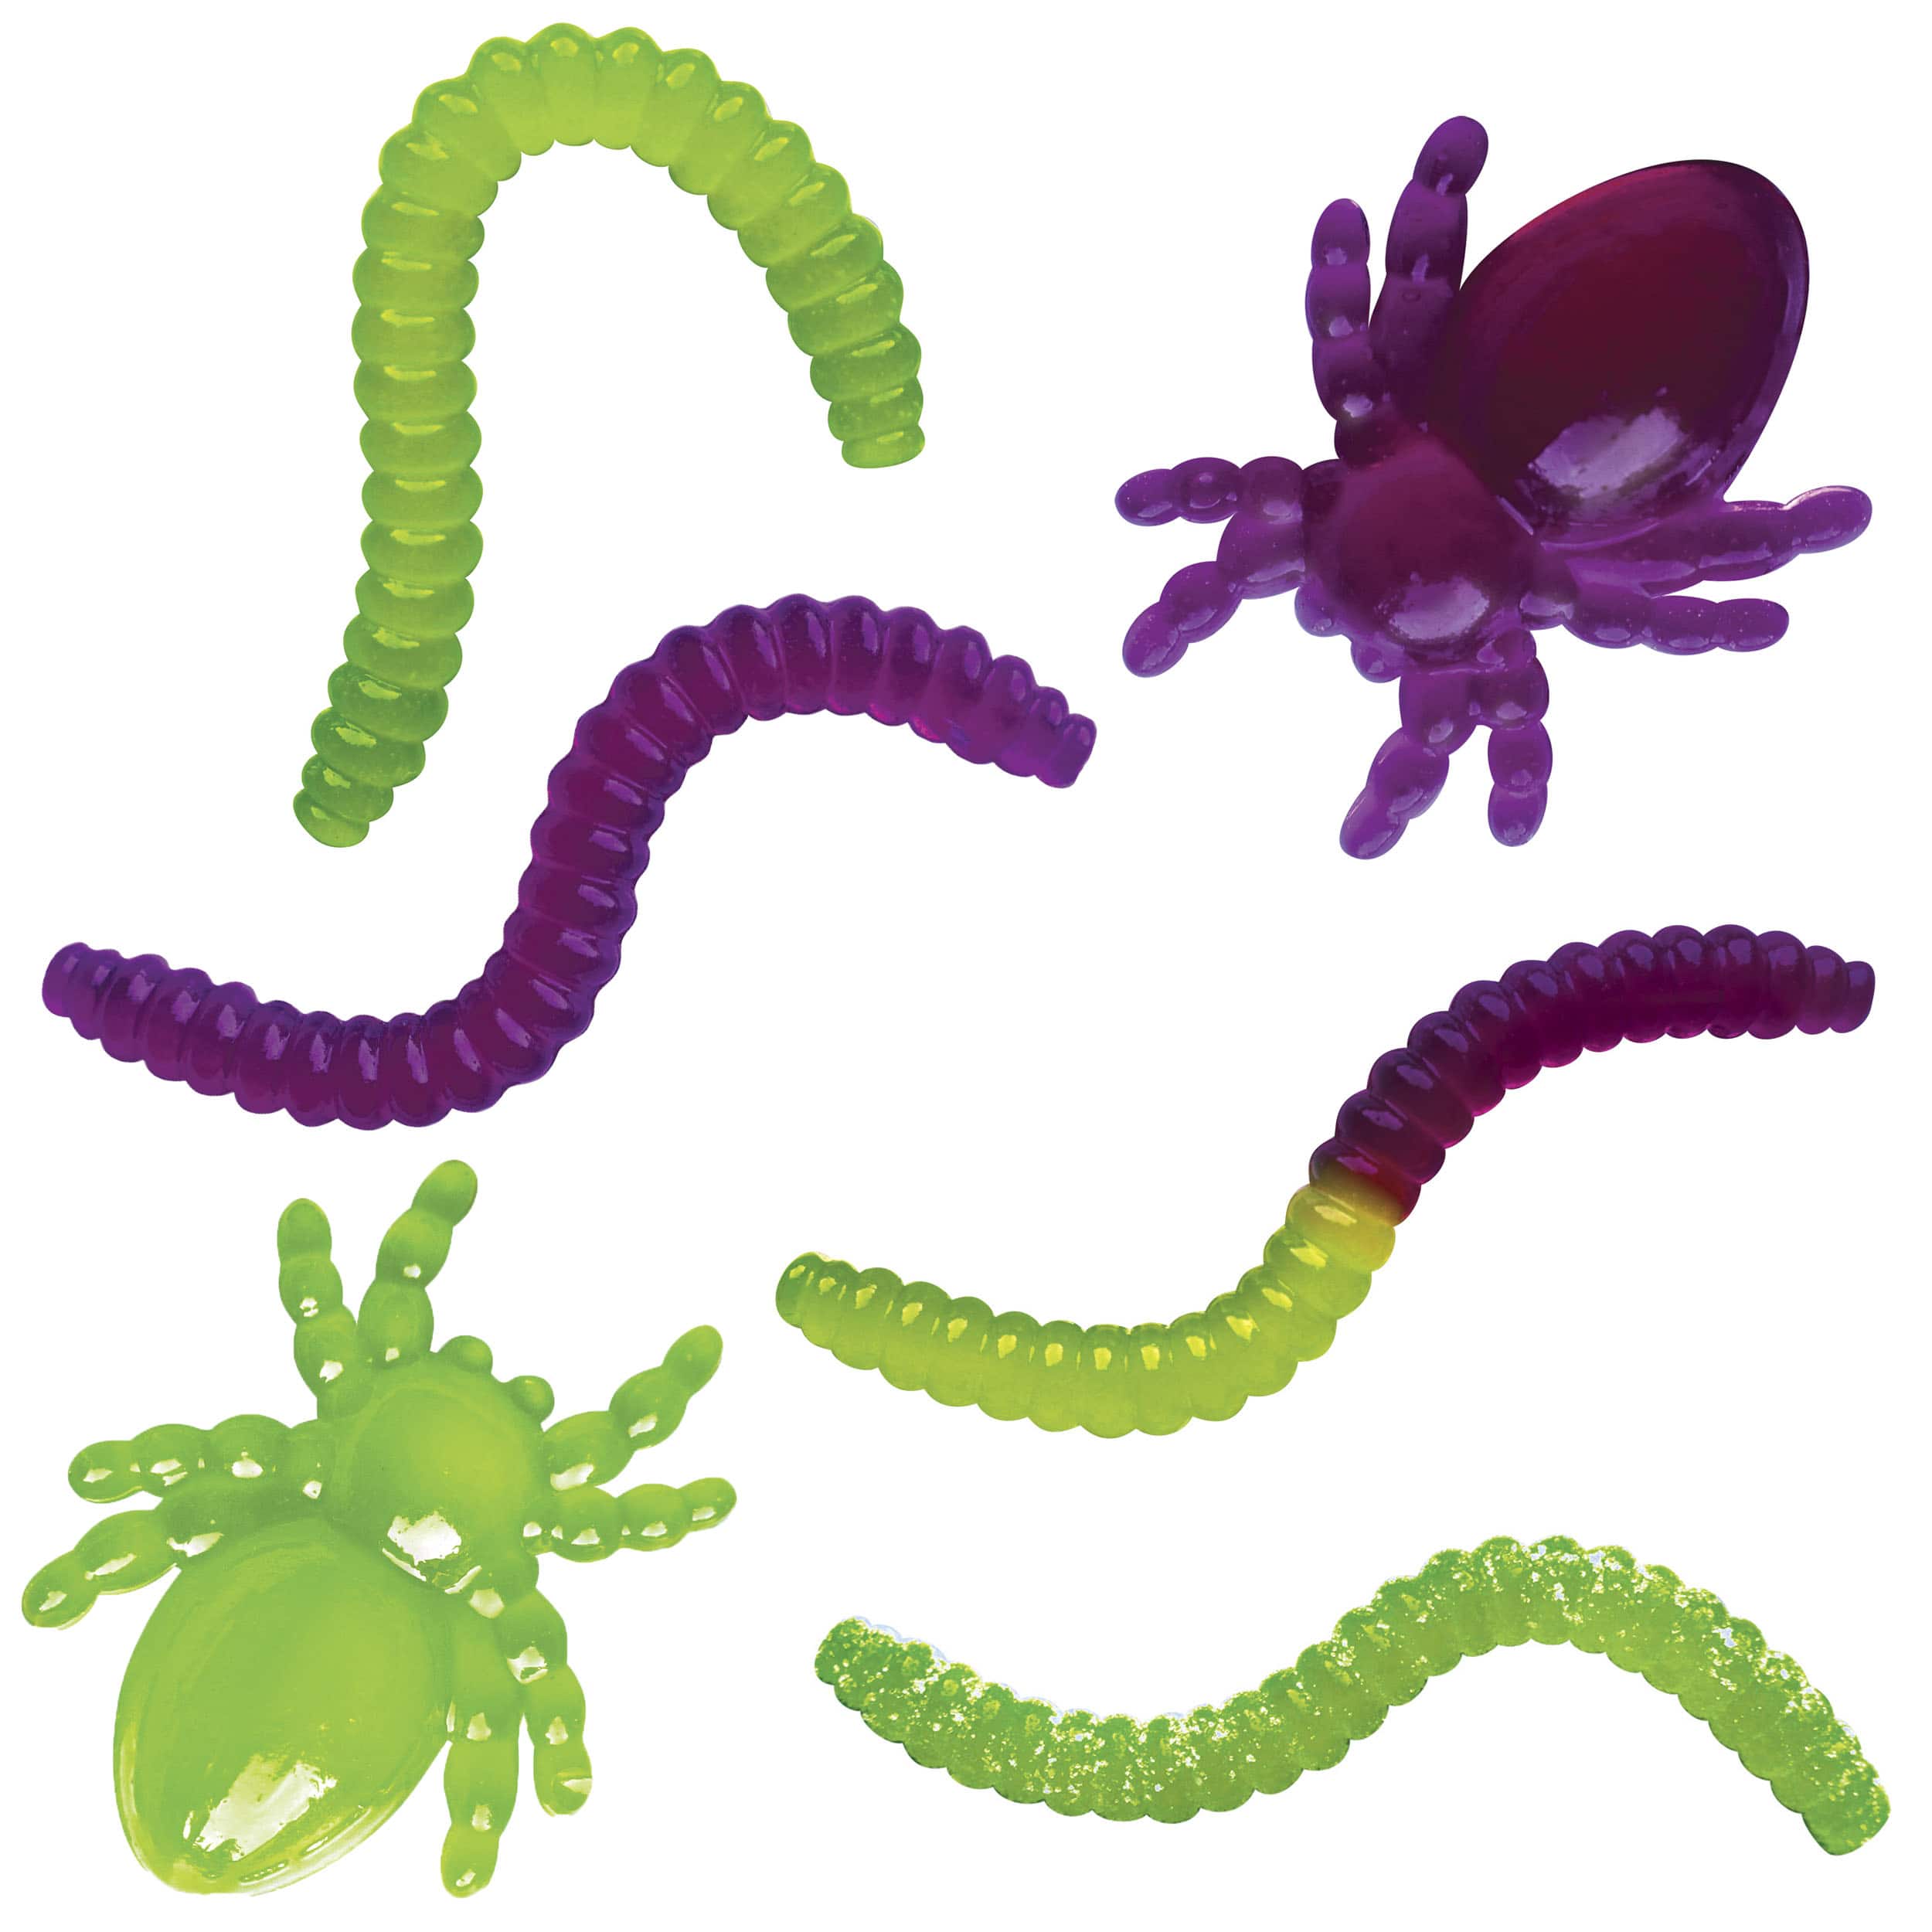 Thames &#x26; Kosmos Gross Gummy Candy Lab: Worms &#x26; Spiders